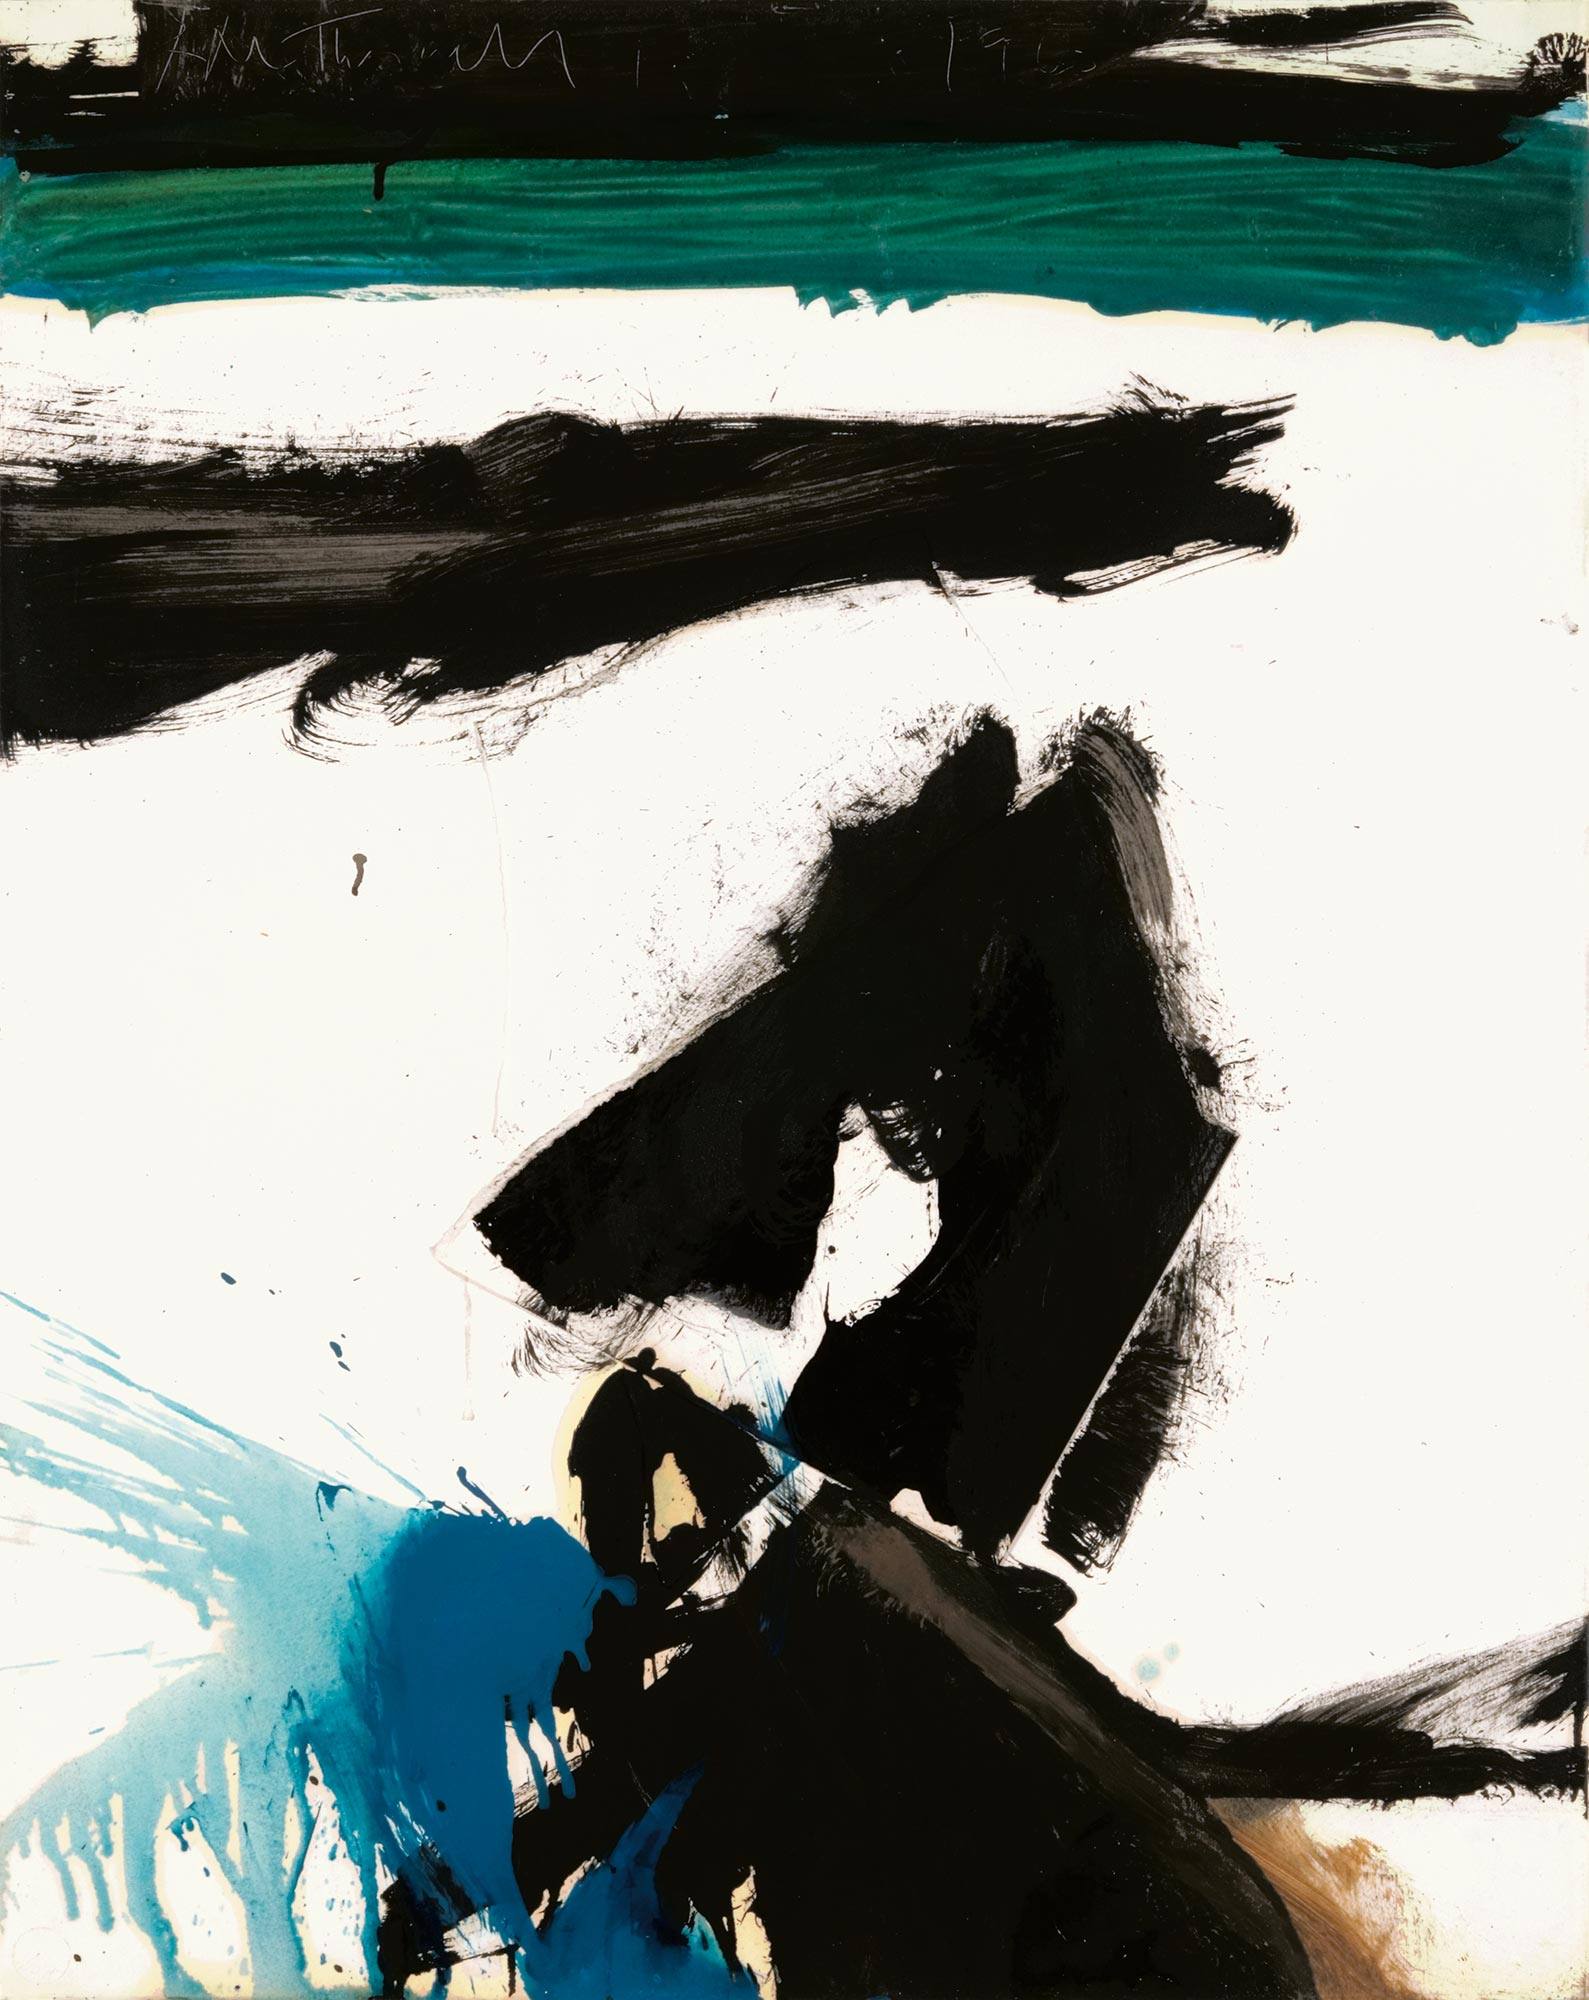 An abstract painting with black, blue and green smeared paint